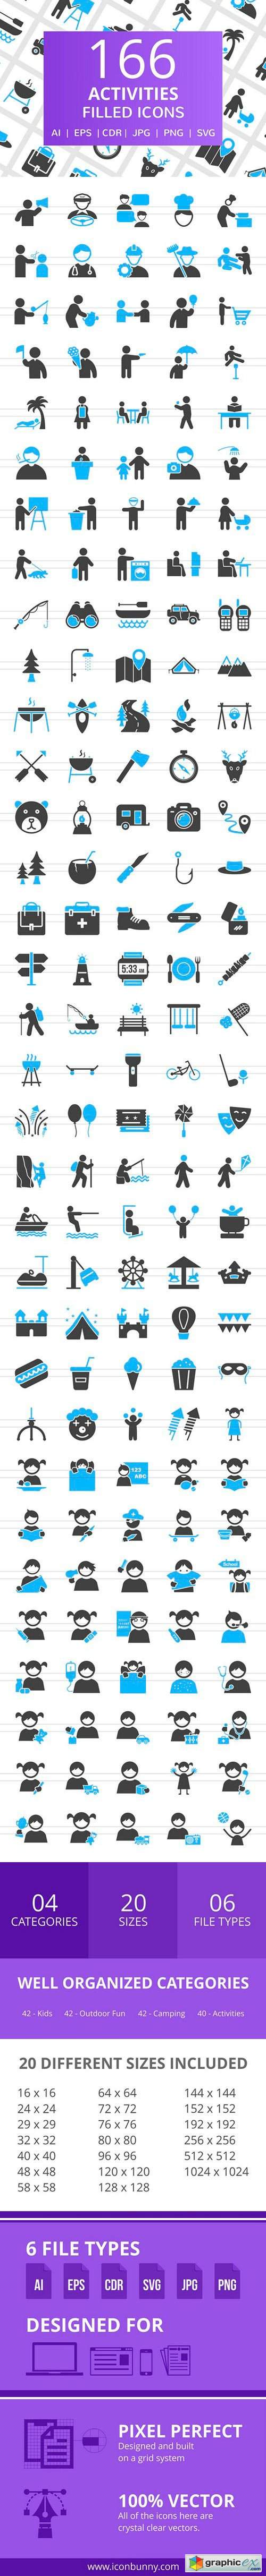 166 Activities Filled Icons